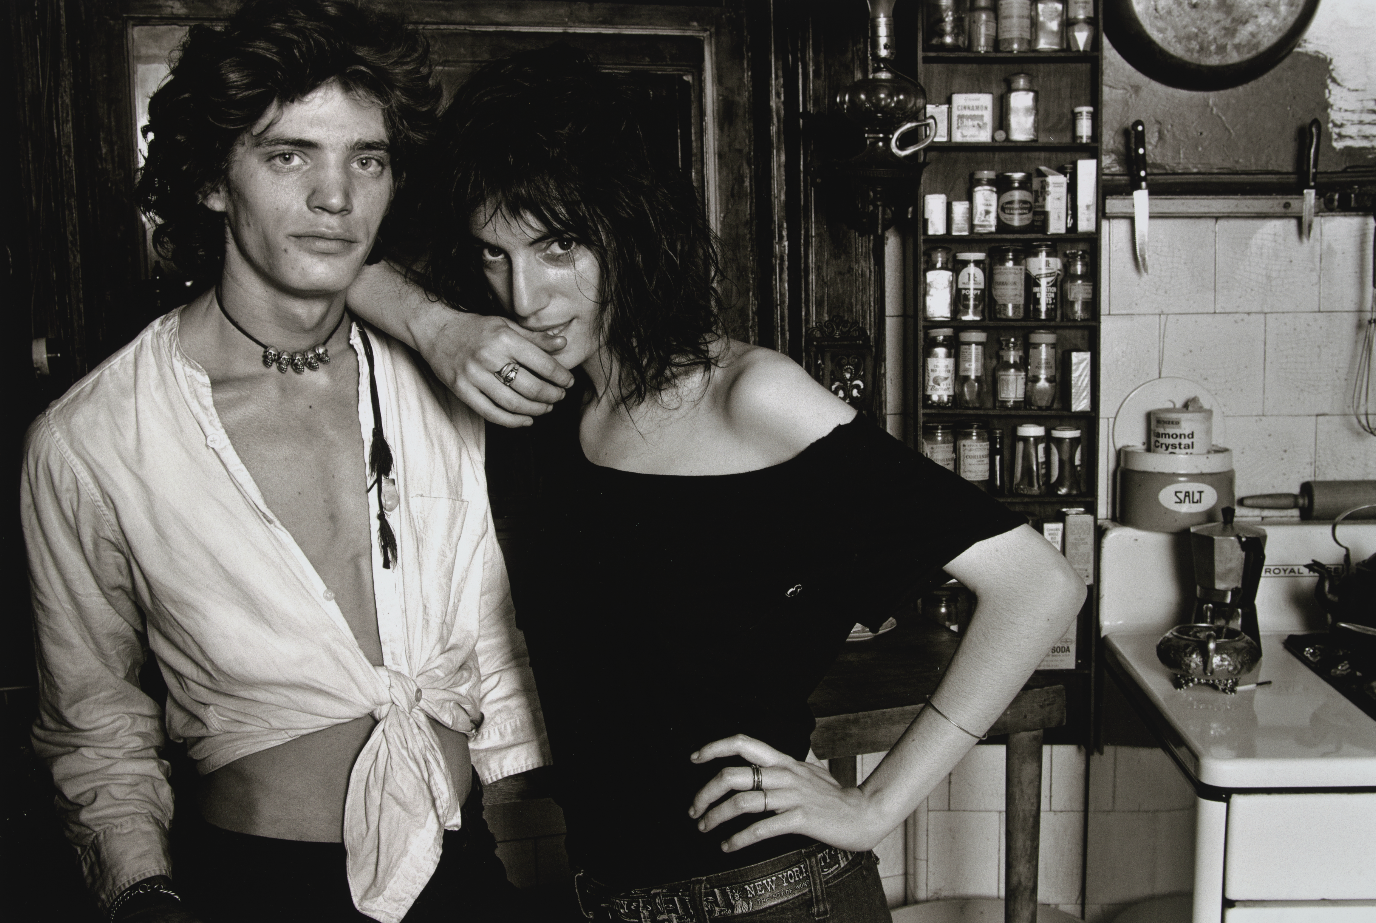   Norman Seeff  United States (born South Africa), born 1939   Robert Mapplethorpe and Patti Smith, New York , 1969 archival pigment print, 15 x 22 inches Promised Gift from the Judy Glickman Lauder Collection, 1.2016.1 